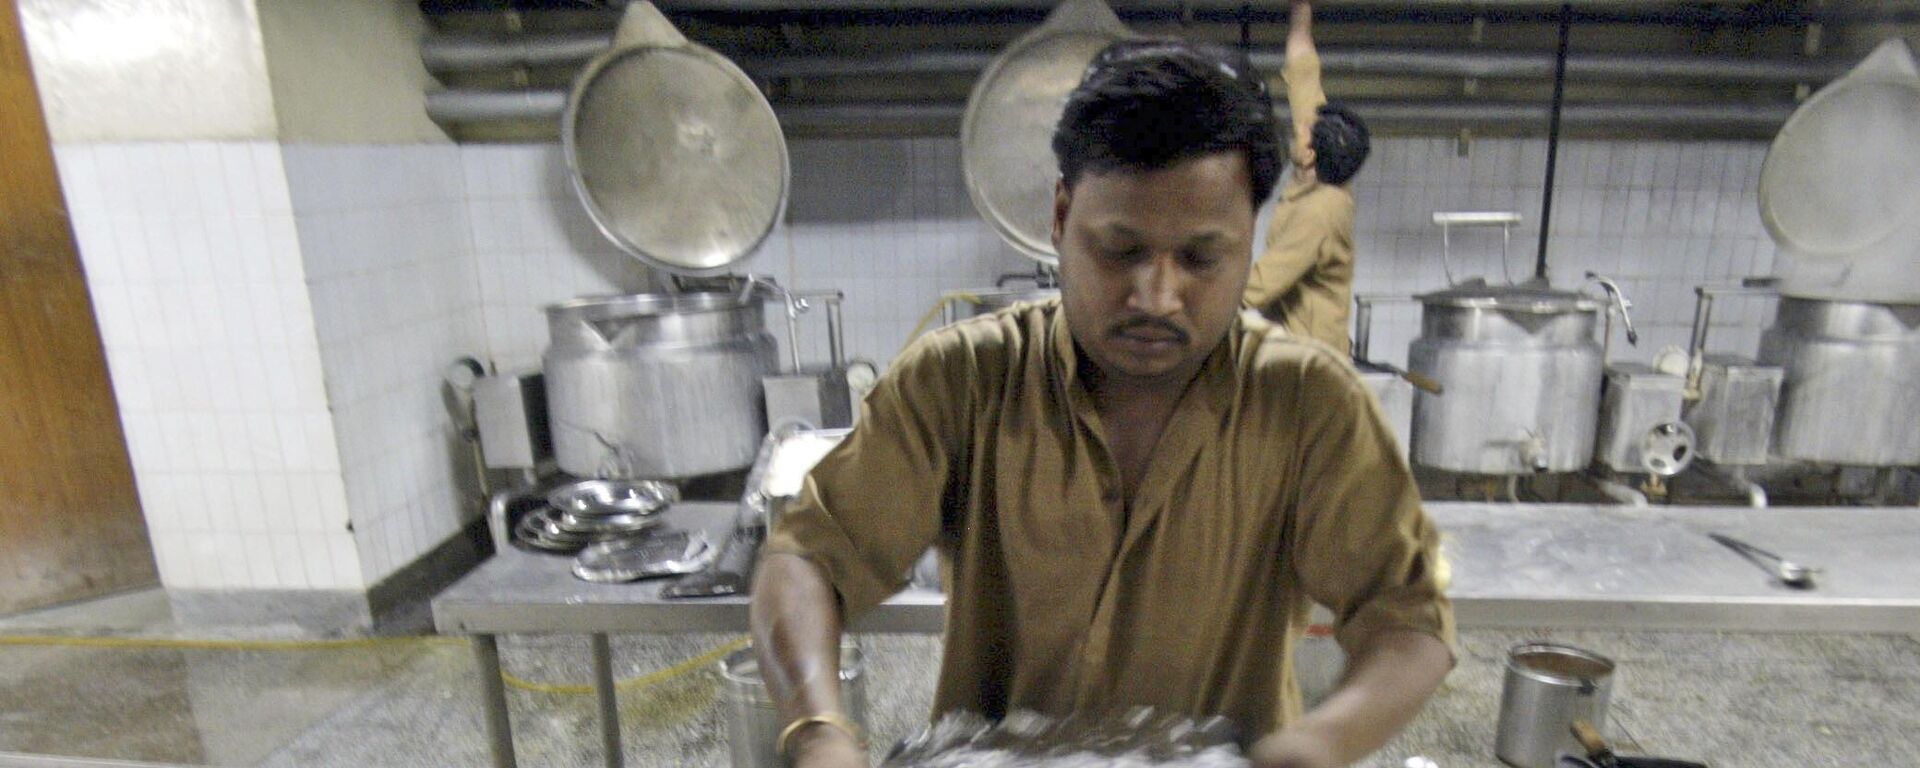 Workers at a government hospital prepare a meal for patients in Jammu, India, Wednesday, May 7, 2008. - Sputnik International, 1920, 15.11.2022